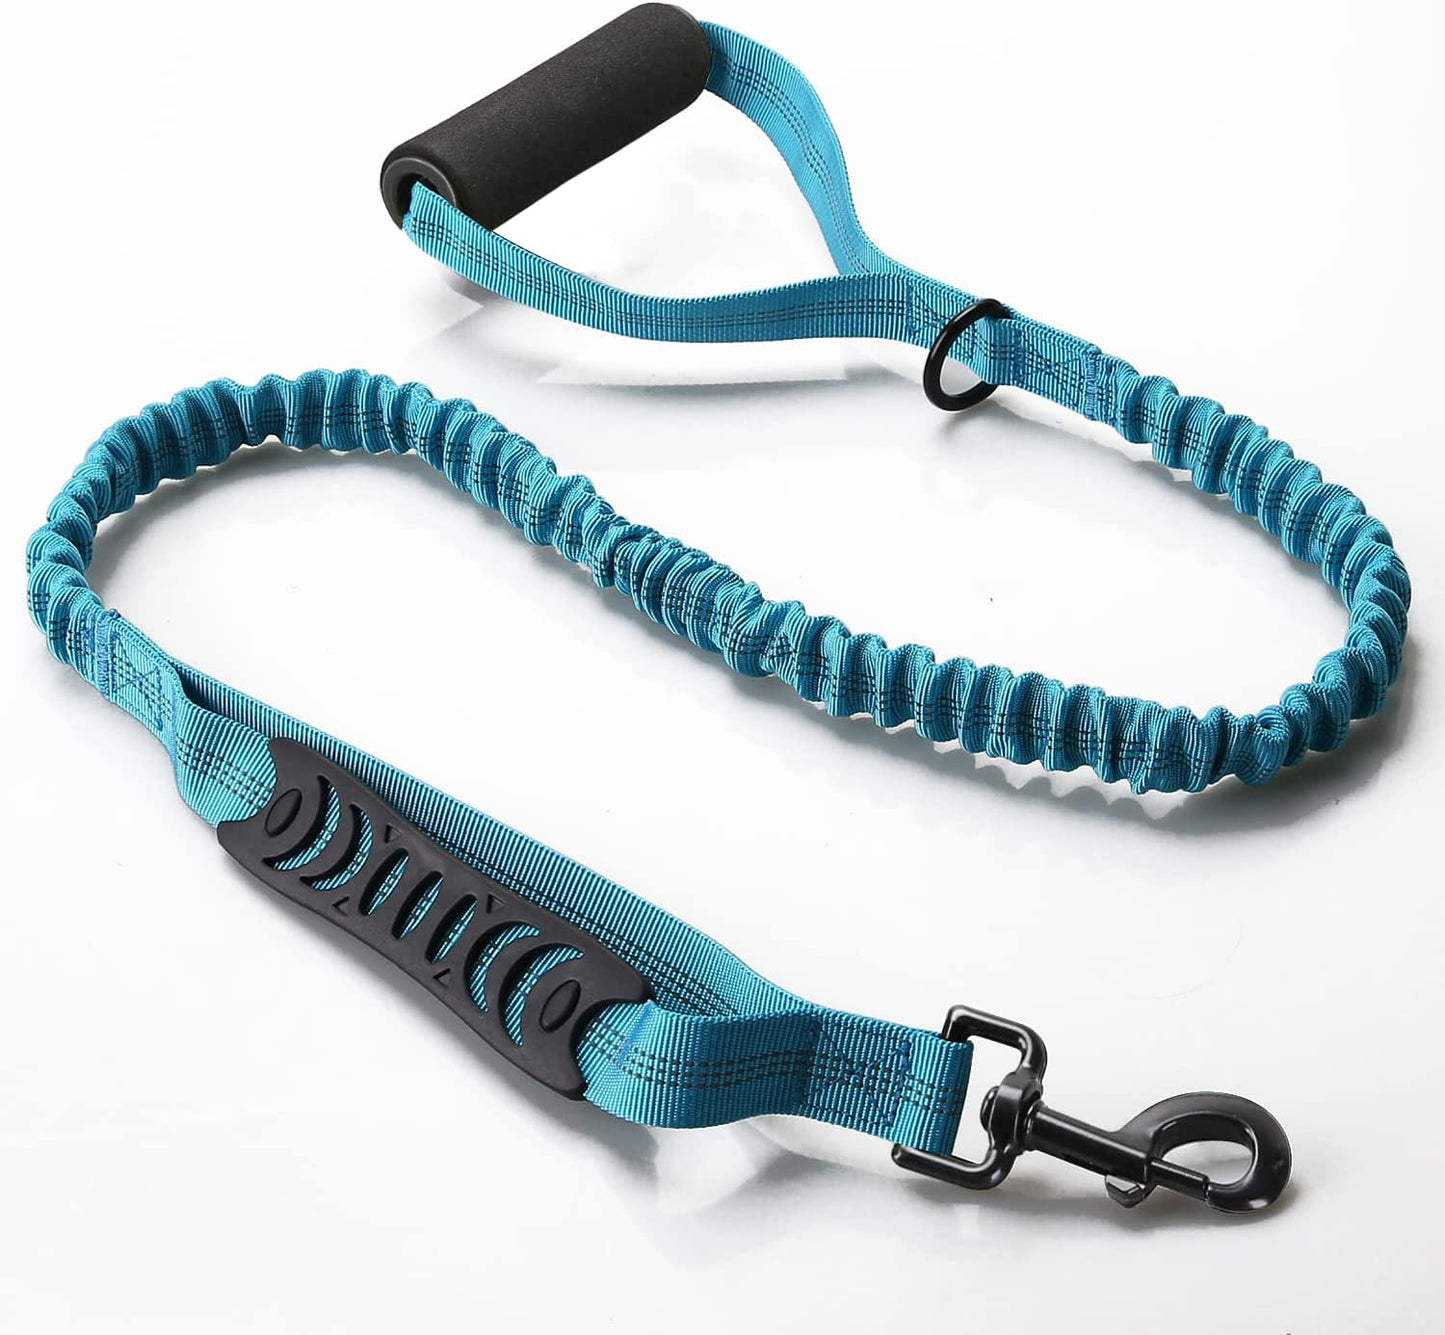 Heavy Duty Reflective Bungee Leash with Padded Handle